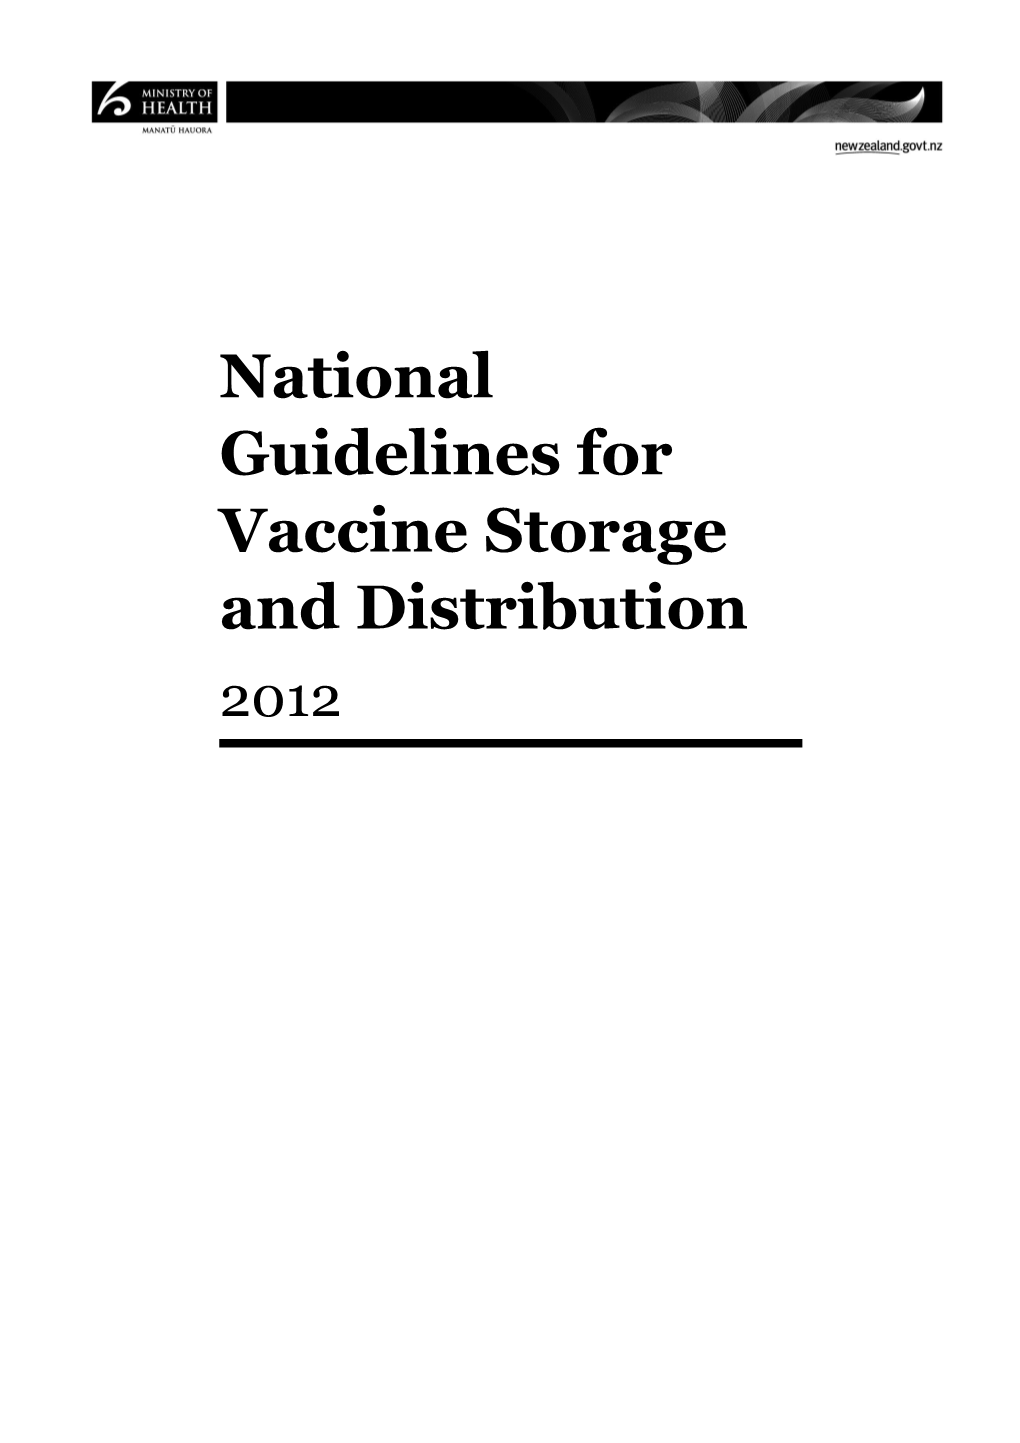 National Guidelines for Vaccine Storage and Distribution